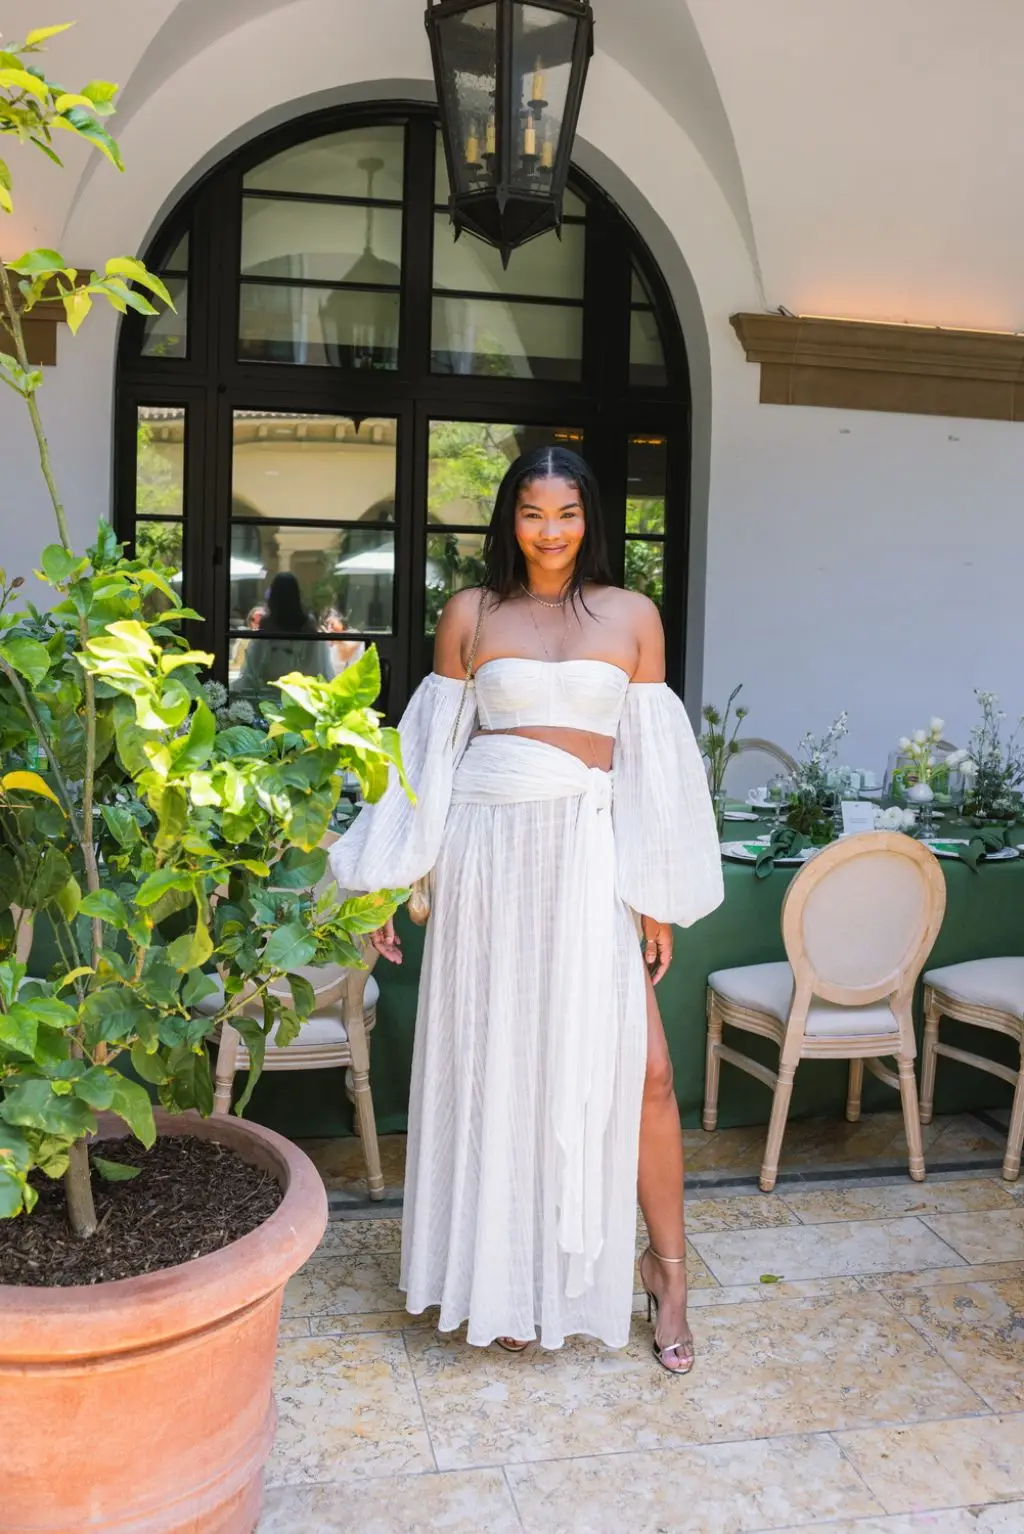 CHANEL IMAN AT A HIGH TEA LUNCHEON WITH LIPTON GREEN TEA AT THE MAYBOURNE BEVERLY HILLS2